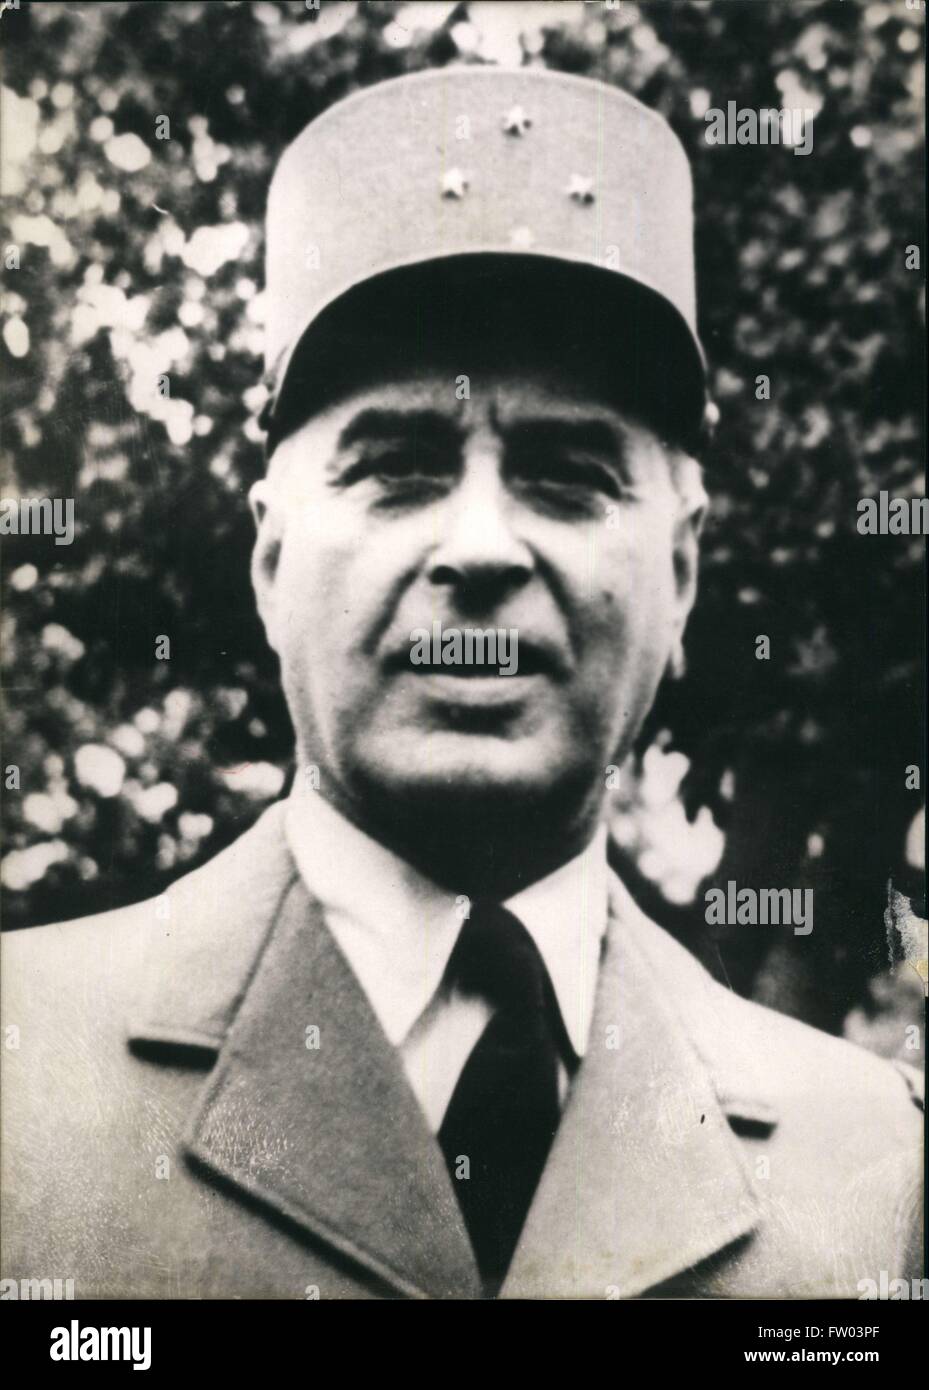 1959 - New French Chief Of Staff: General Lorrillot has been appointed Chef of Staff the french Army. Photo shows A recent Portrait of General Lorillot. © Keystone Pictures USA/ZUMAPRESS.com/Alamy Live News Stock Photo